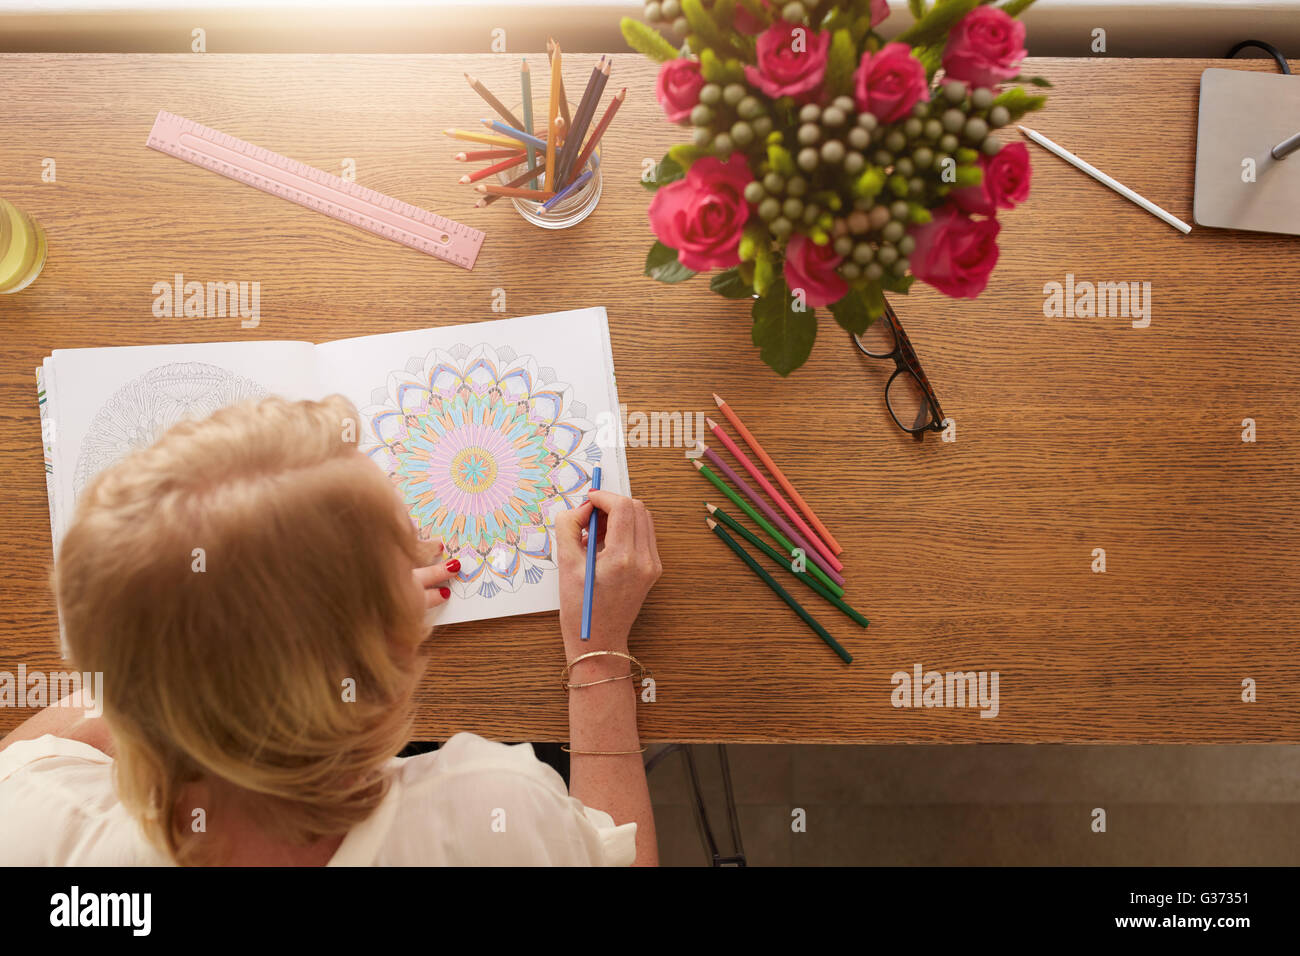 Top view of woman coloring floral designs with color pencils for relaxation at home. Anti stress adult coloring book. Stock Photo